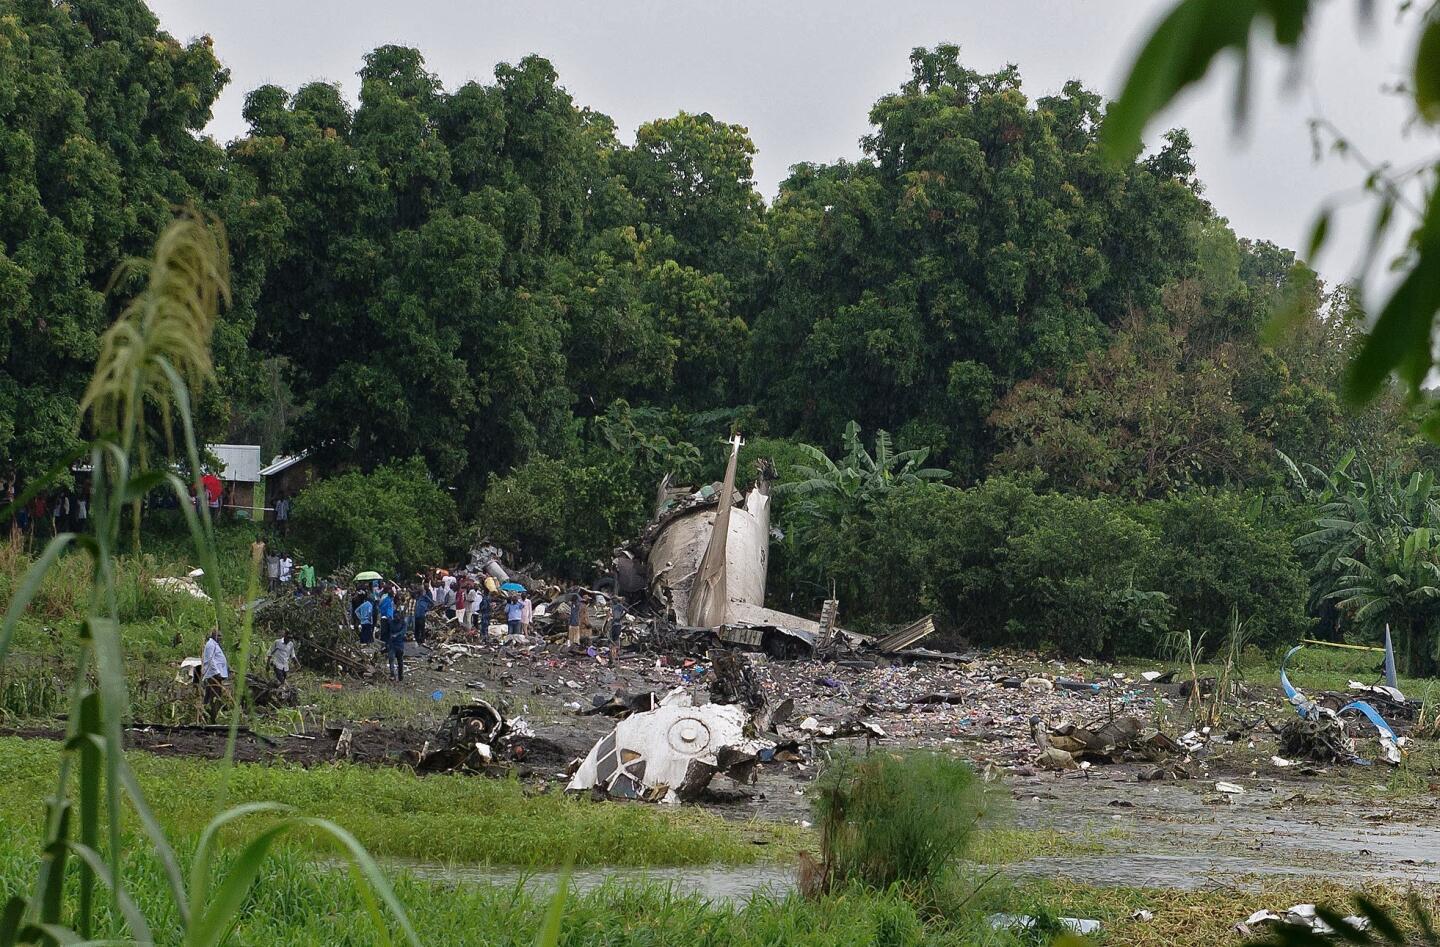 People gather at the site where a cargo plane crashed into a small farming community on a small island in the White Nile river, close to Juba airport in the Hai Gabat residential area in South Sudan, on Nov. 4, 2015.